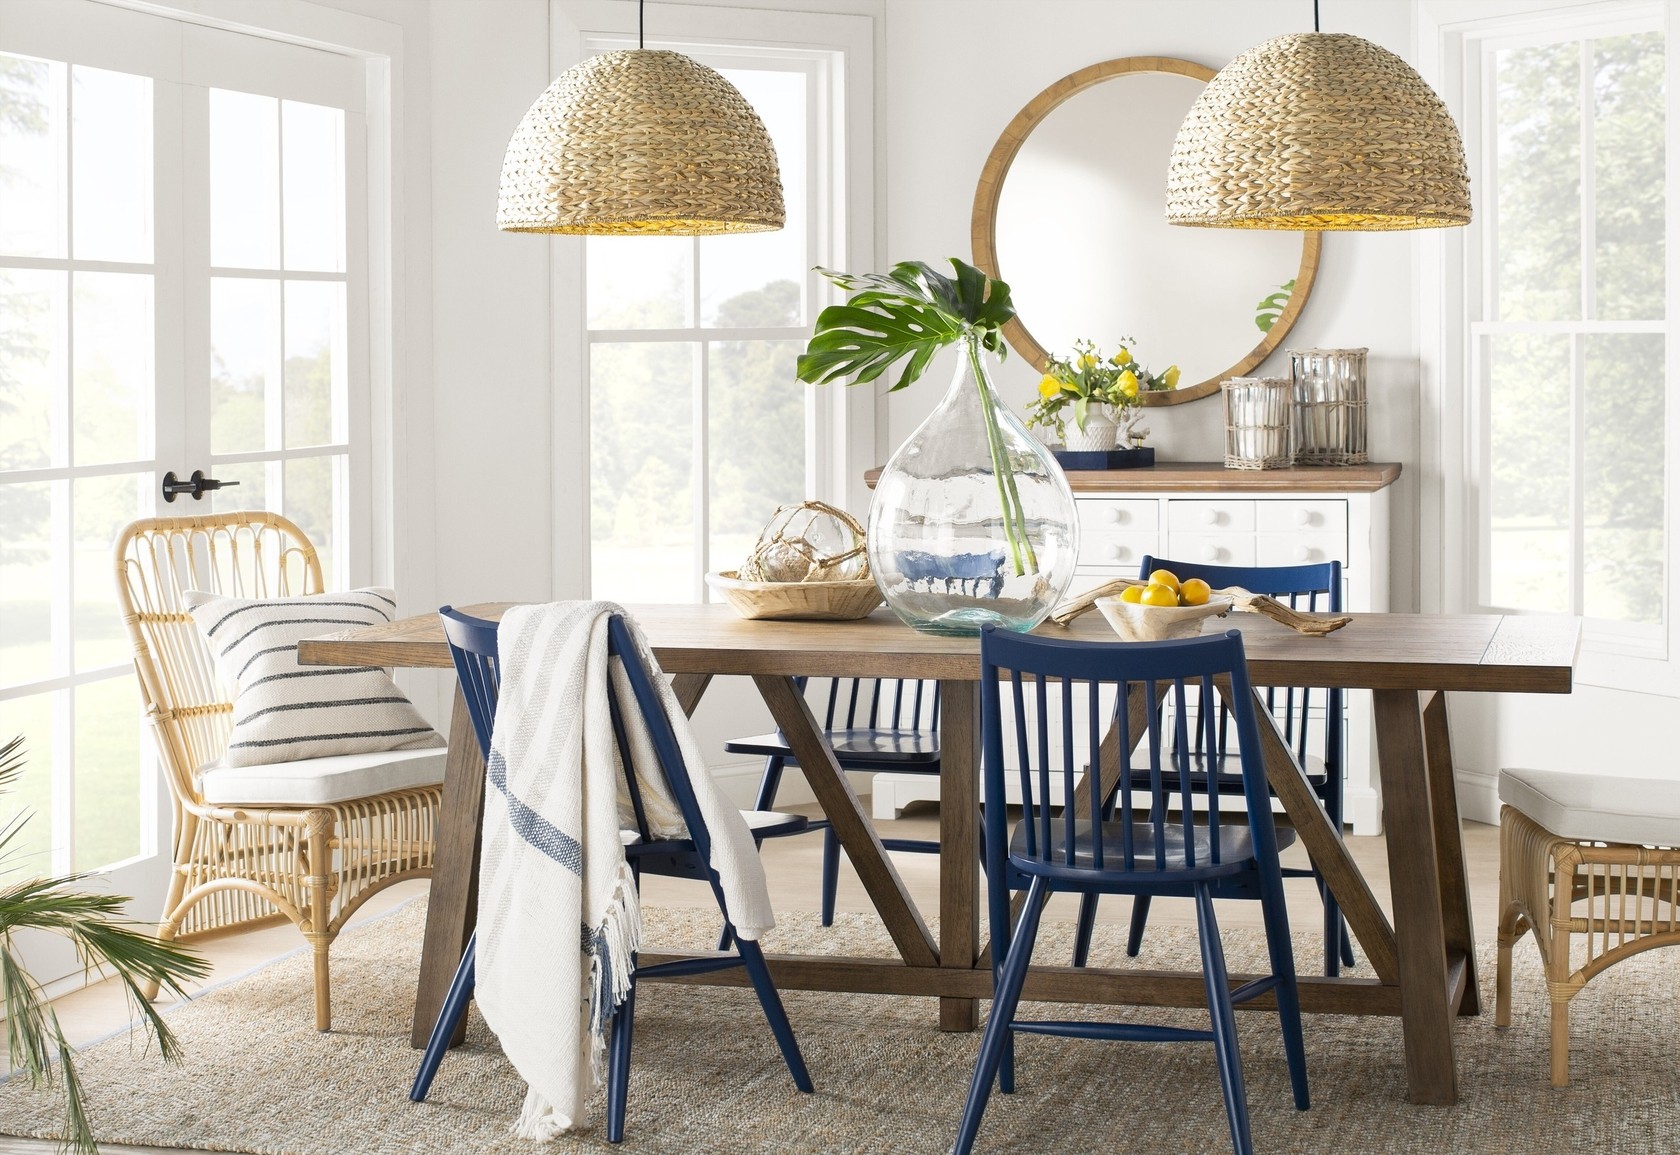 1-1-5 Colors That Go With Royal Blue When Decorating a Room